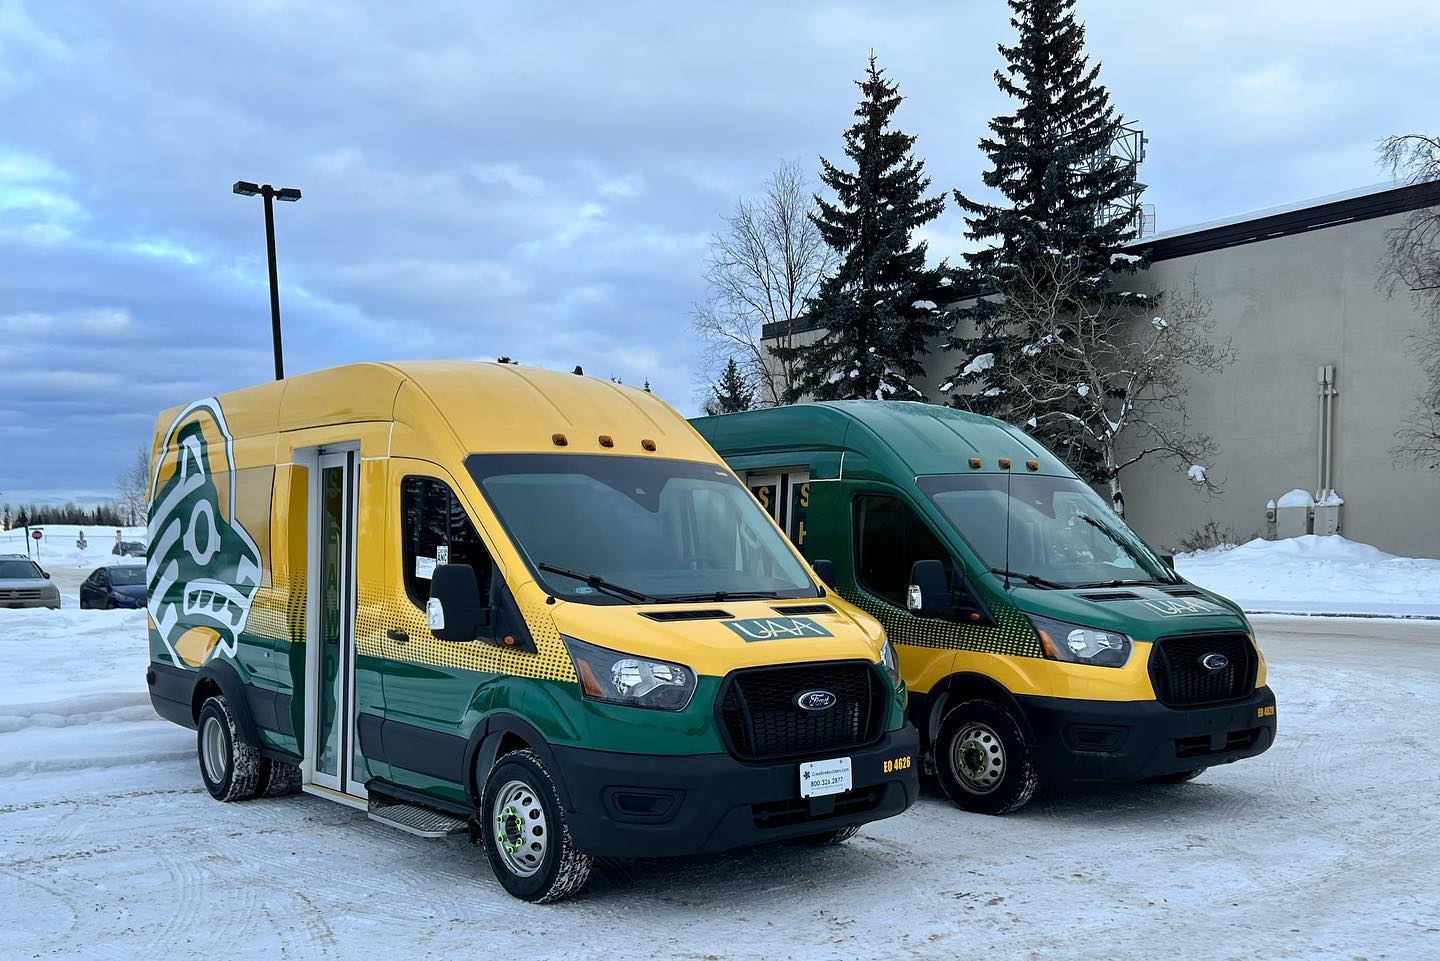 The 2 Seawolf shuttles sitting in the campus parking lot on a snowy day.